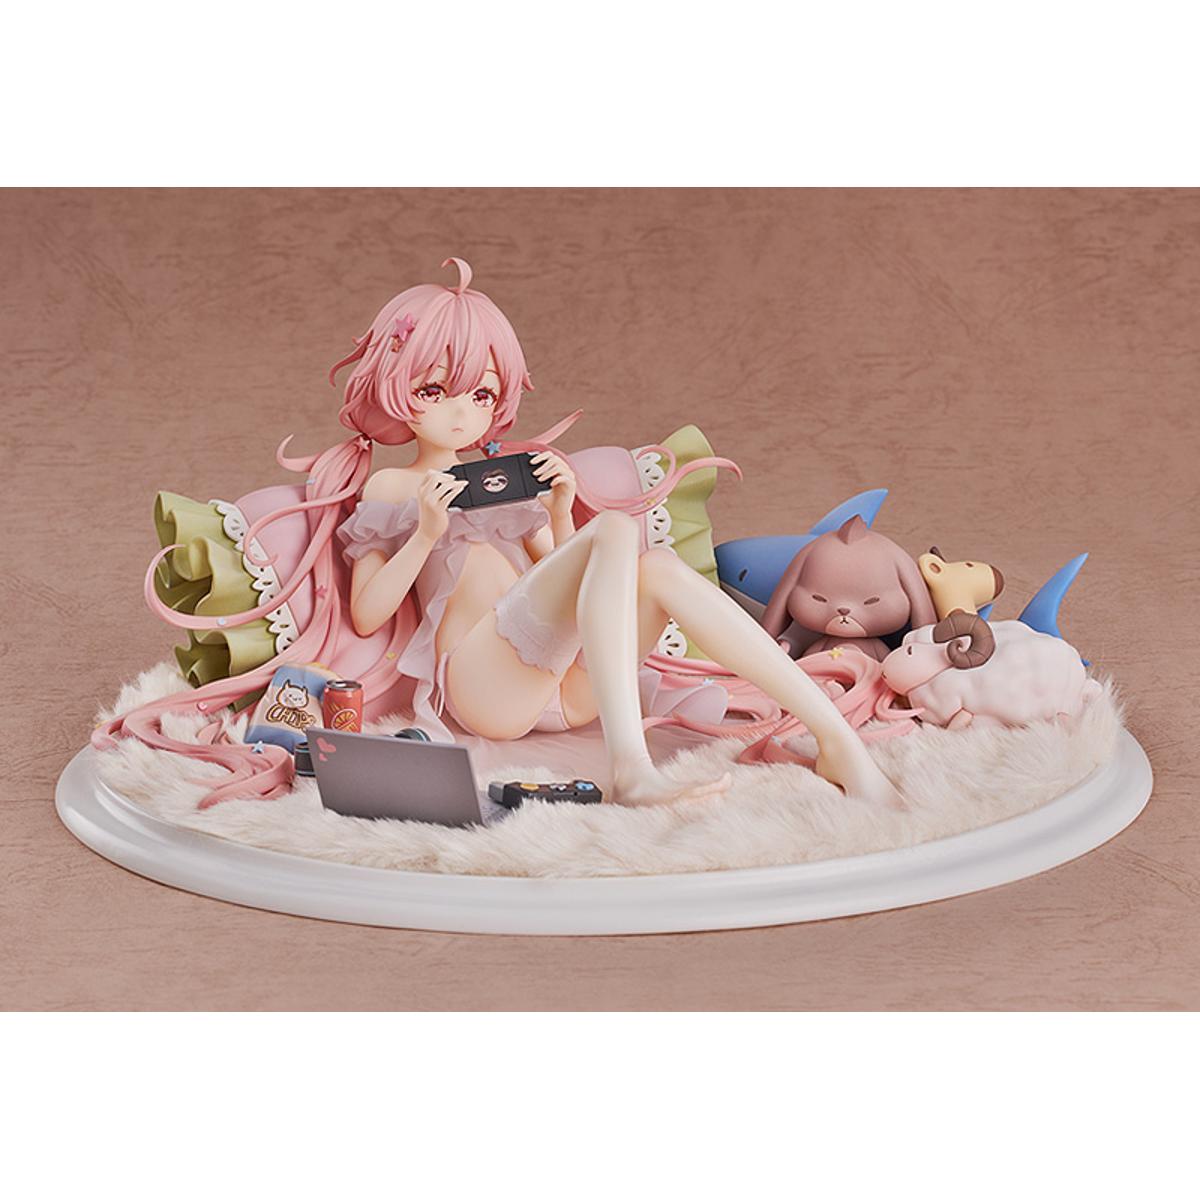 Evanthe Lazy Afternoon Ver. 1/7 Scale Figure